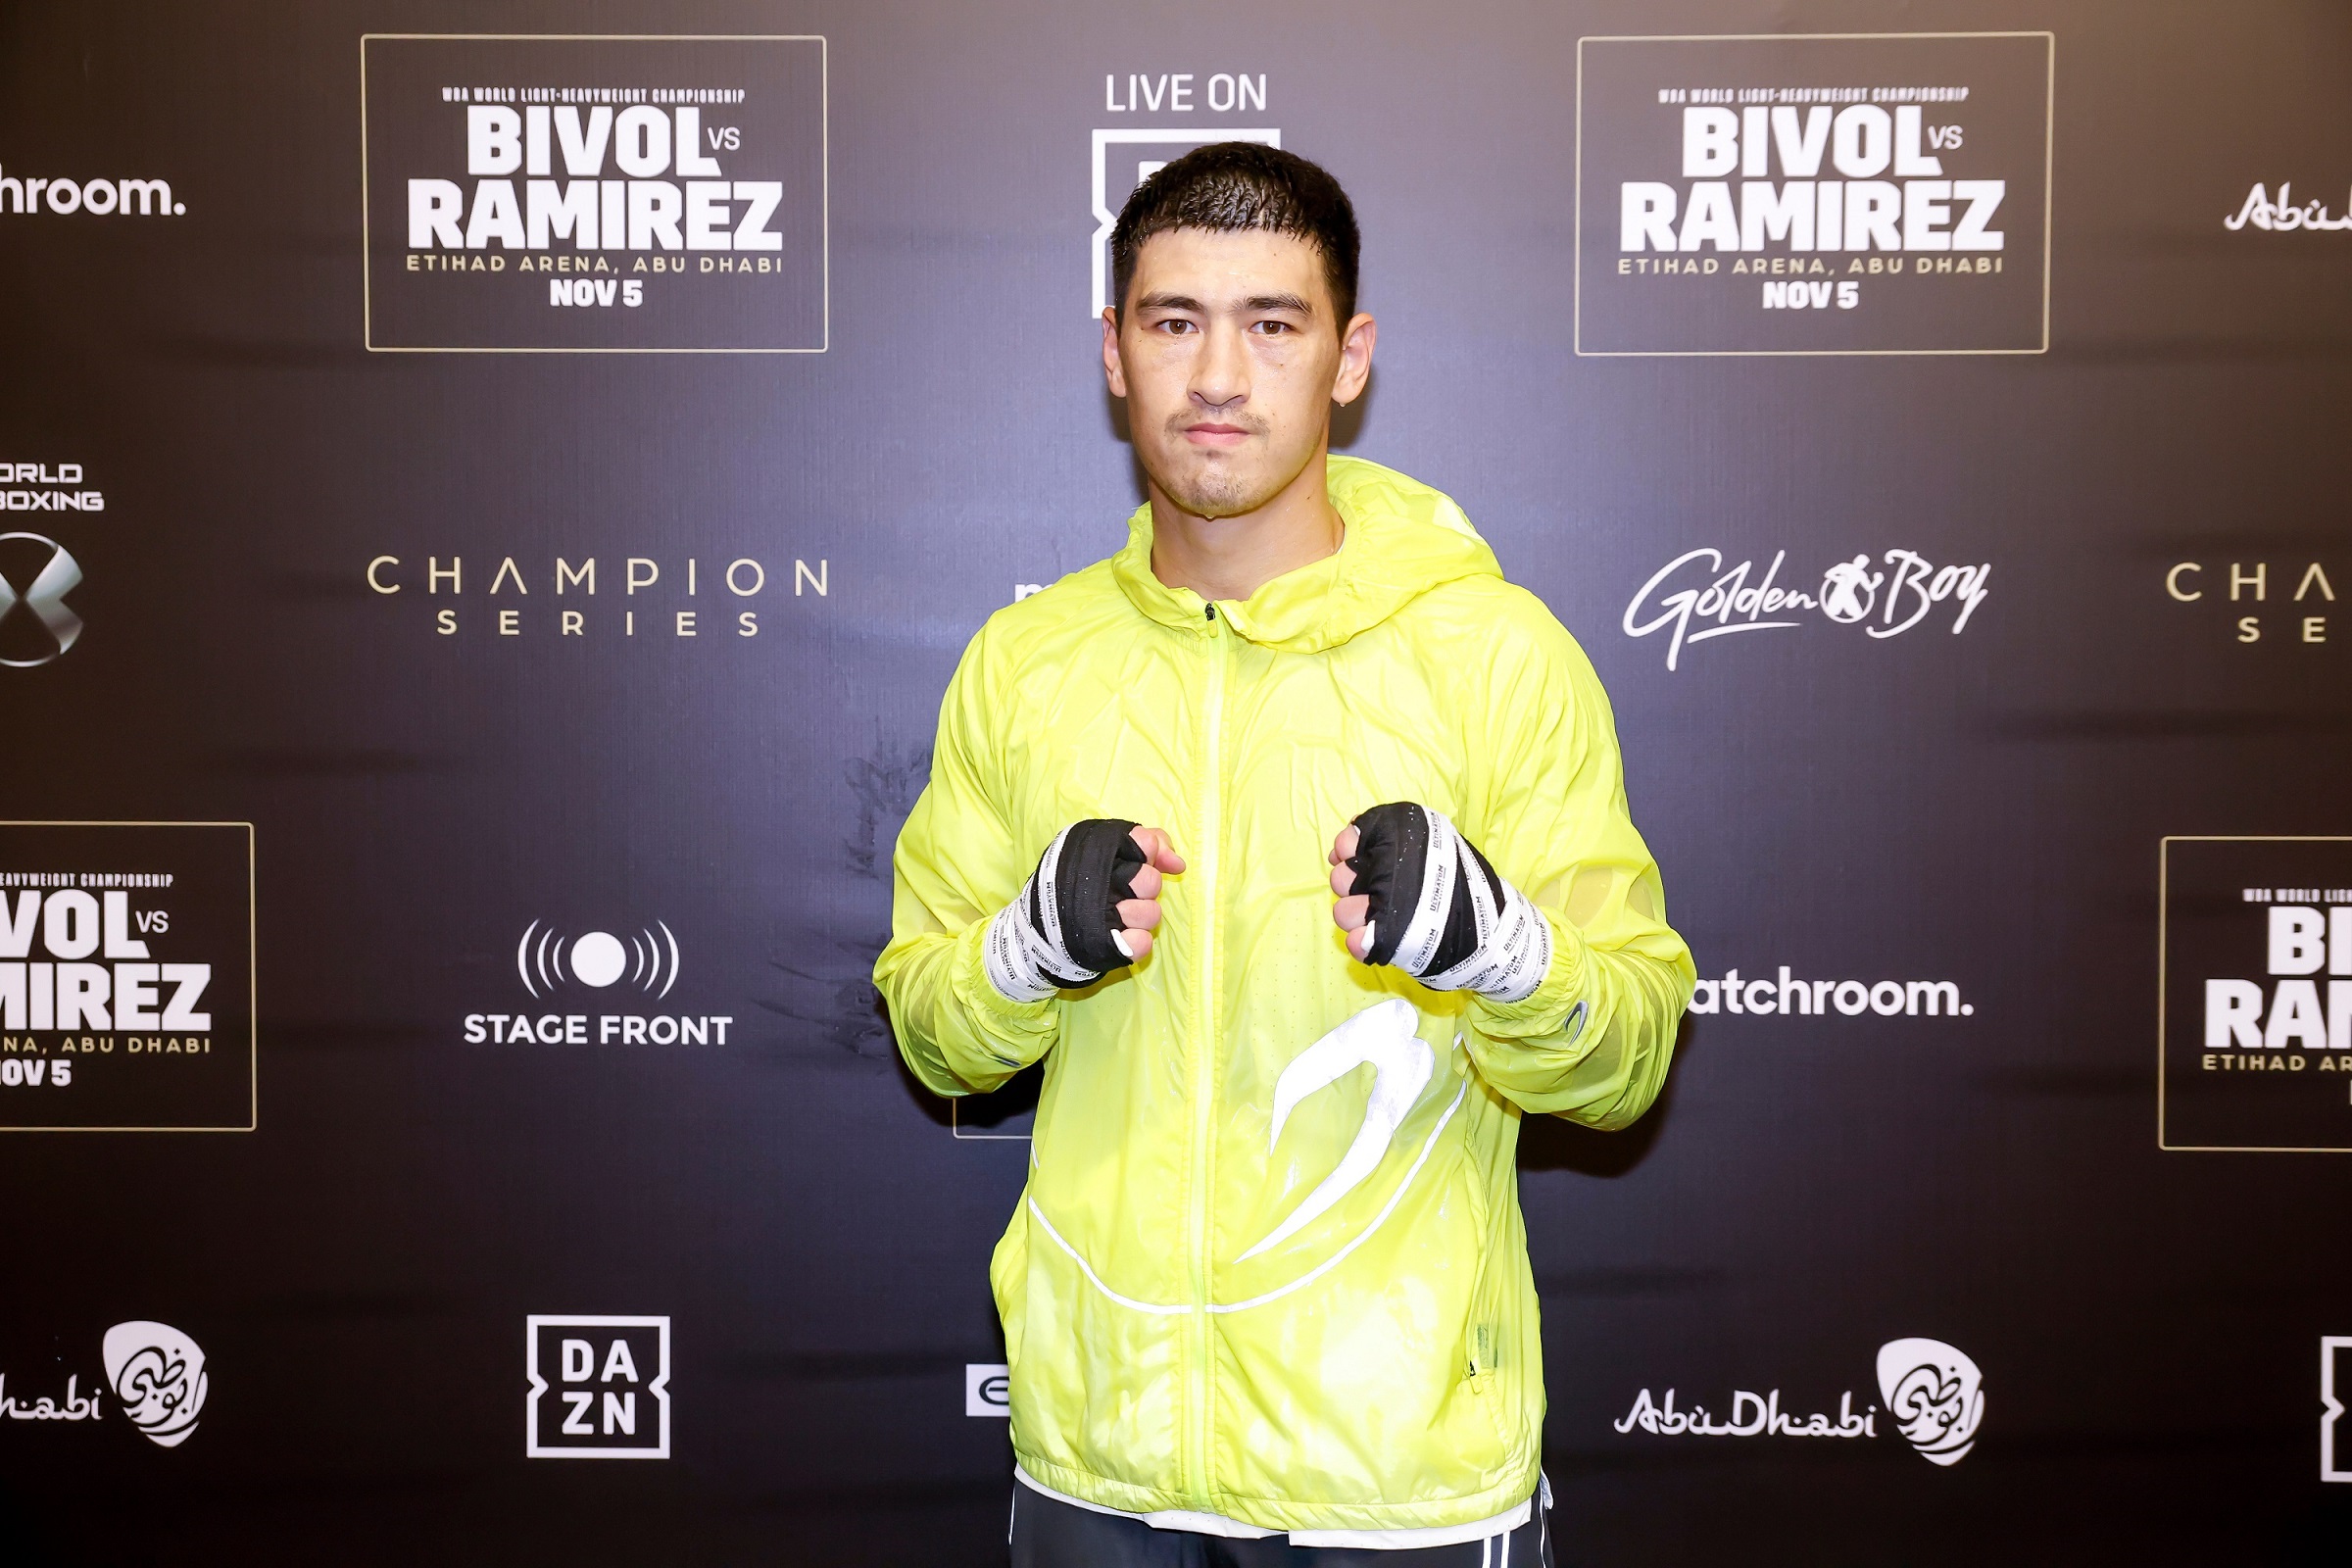 Bivol Expecting Fireworks As Preparations Ramp Up For First World Title Fight In Abu Dhabi